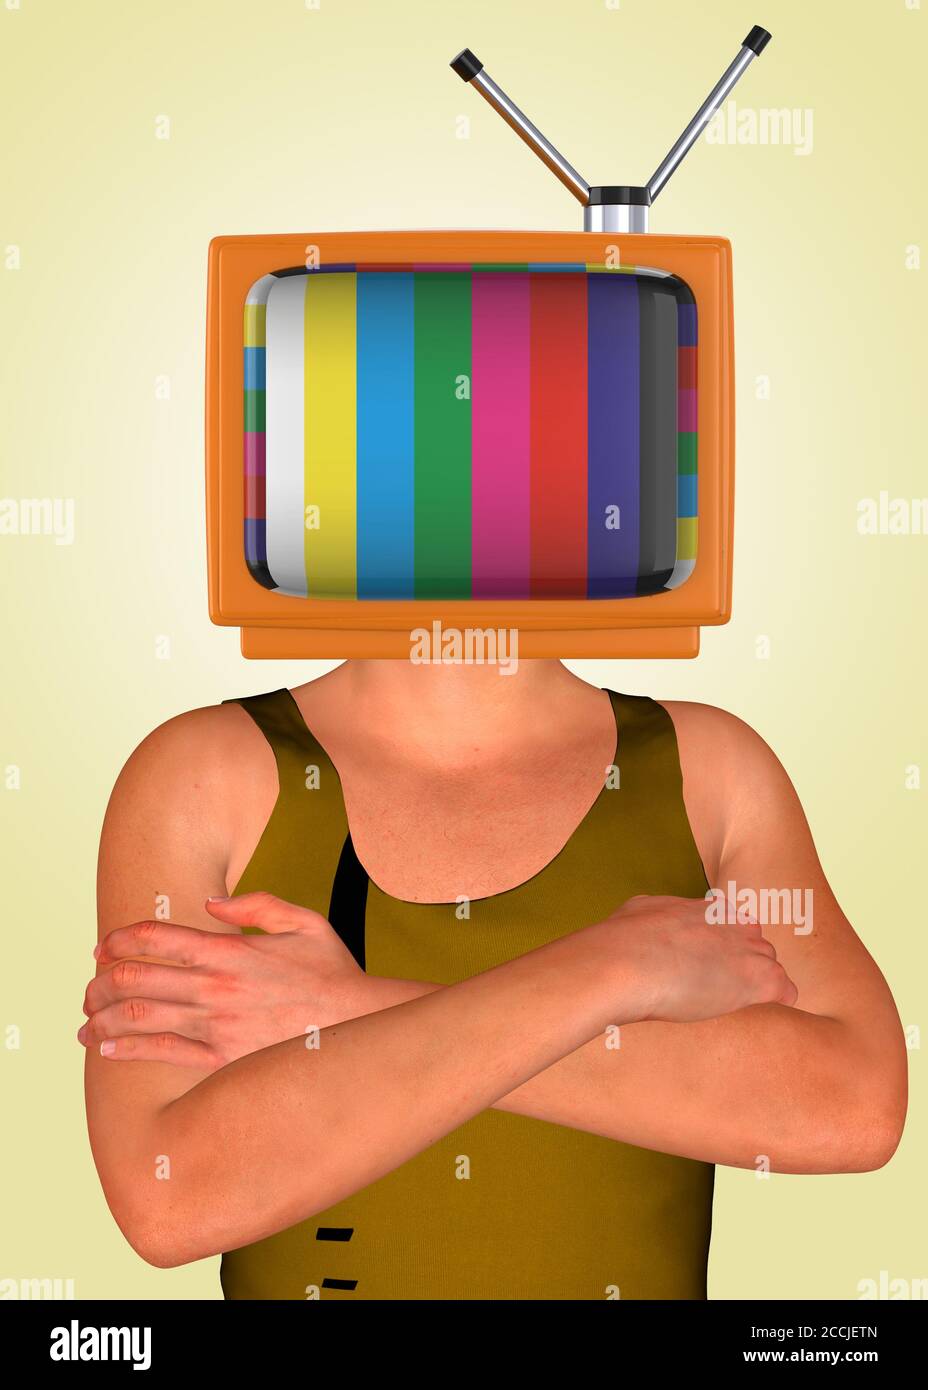 Mass Media influence our thoughts - 3D Concept Stock Photo